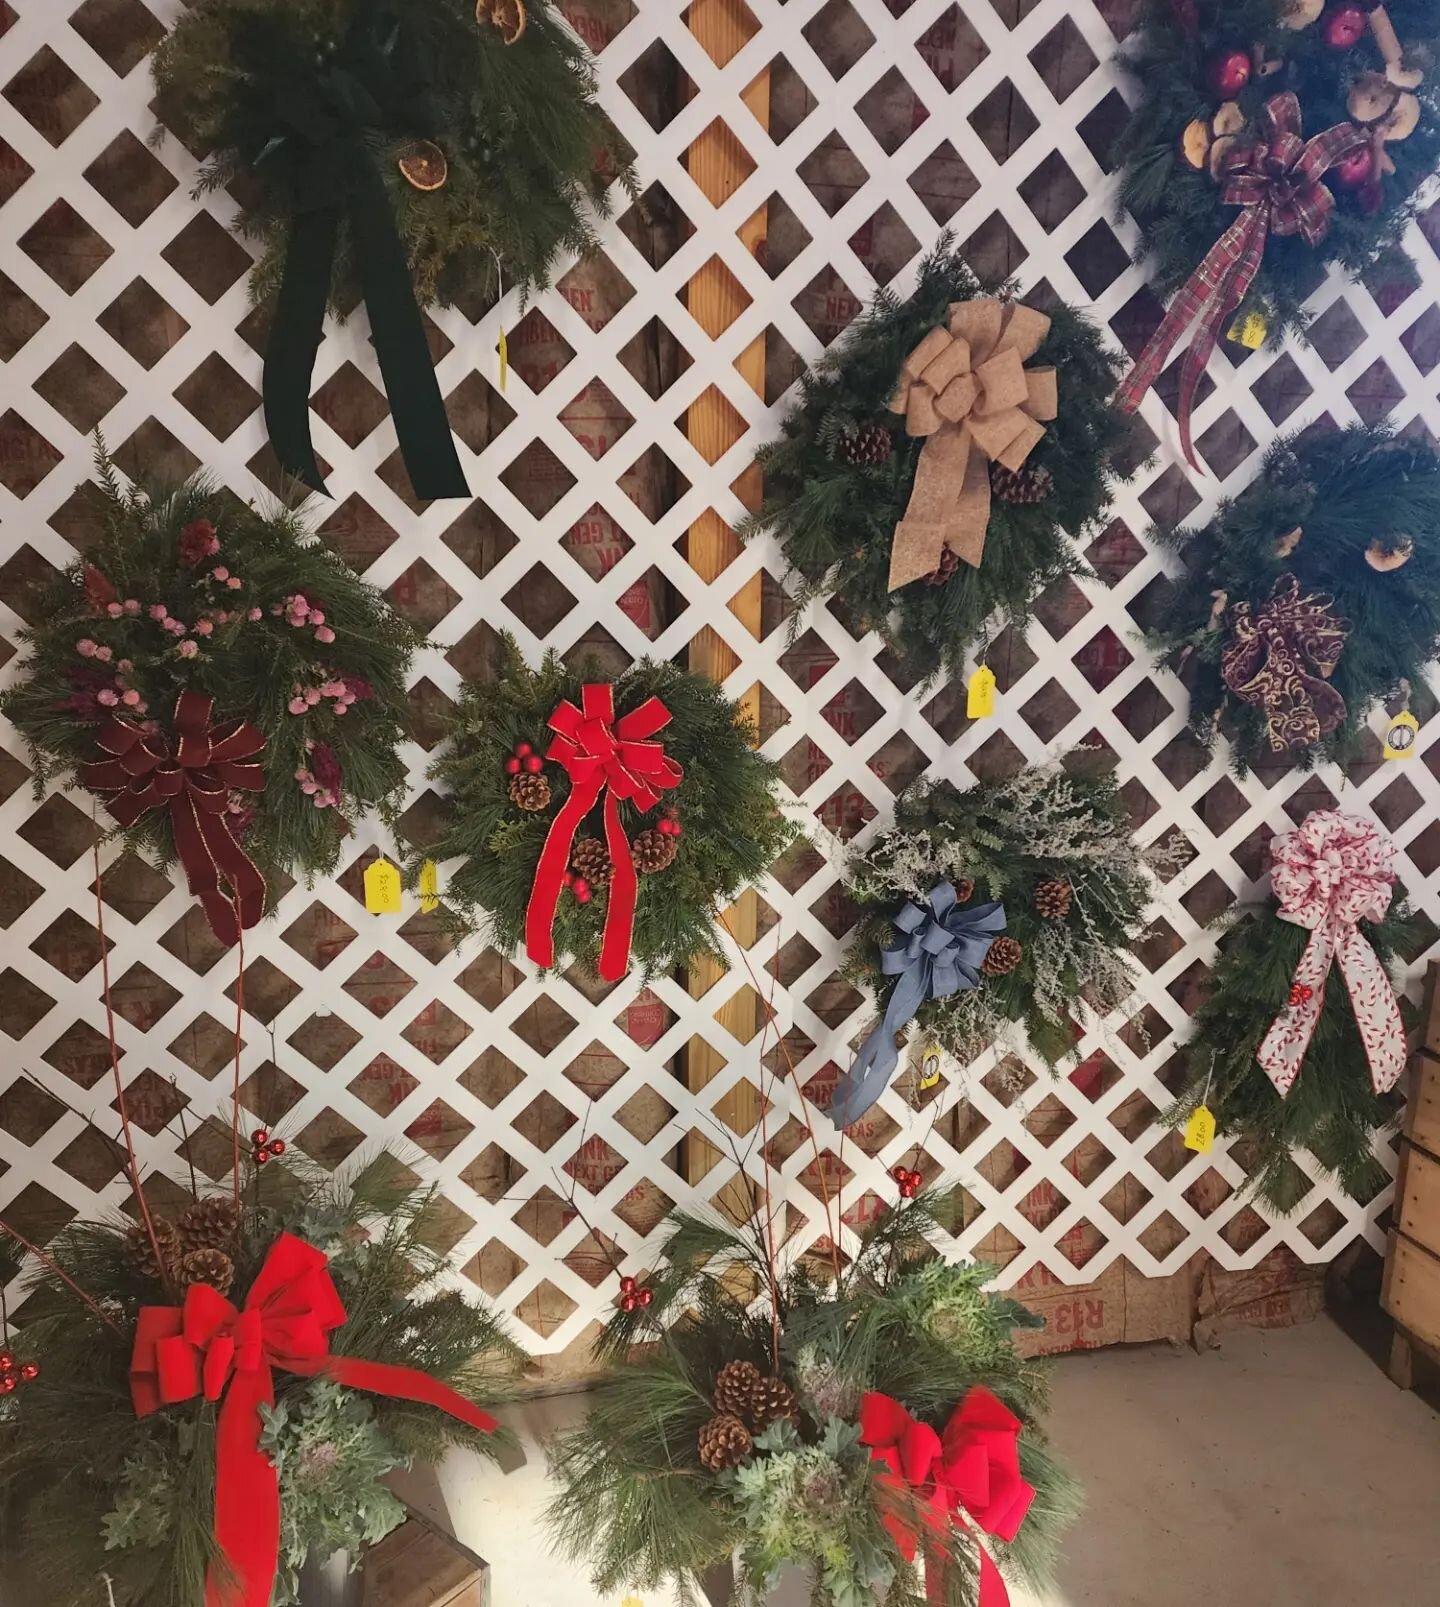 We're open for our last day of our Wreath Extravaganza today, Sunday, 9am to 3pm in our barn.  We have evergreen wreaths, evergreen swags, dried flower wreaths, evergreen planters, dried flower ornaments, and a few dried flower bouquets.  Don't miss 